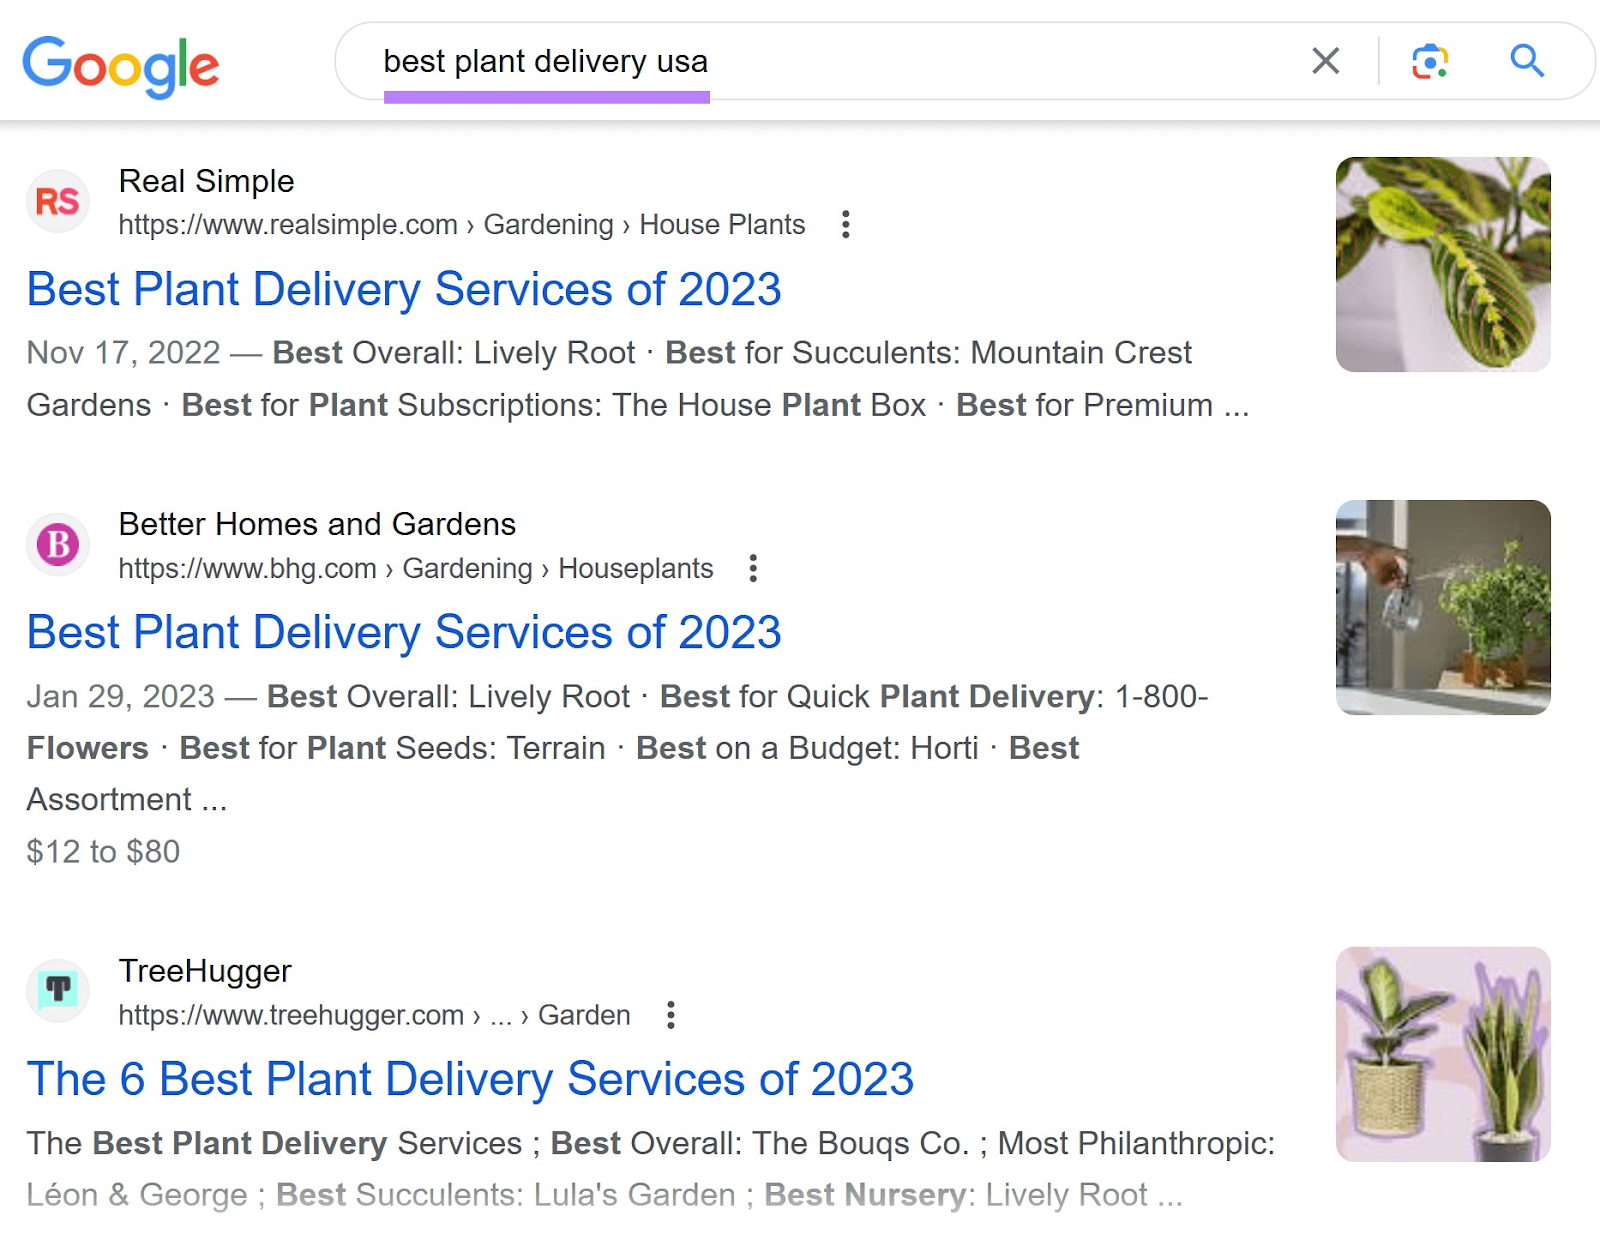 Google SERP for "best plant delivery usa"